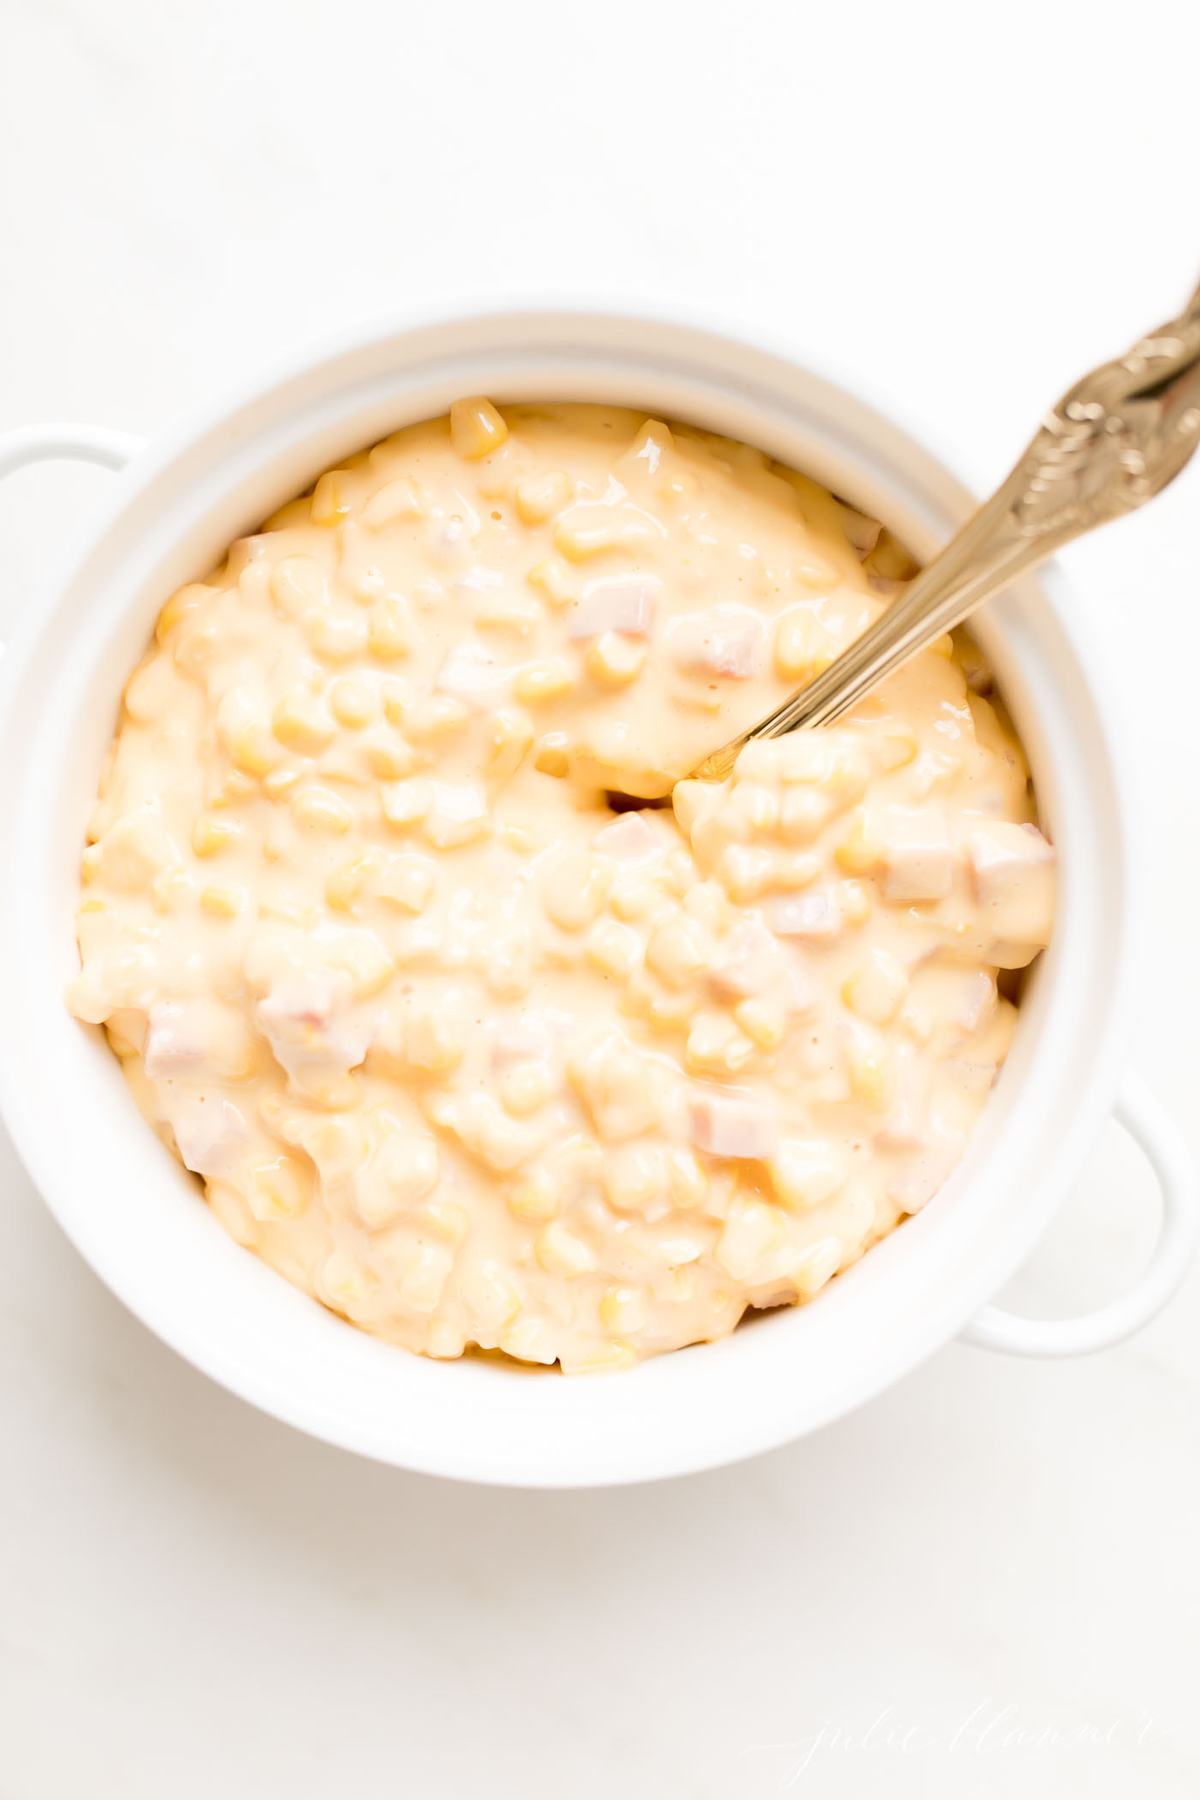 A white casserole dish filled with Cheesy Corn Casserole, a gold spoon in the center.